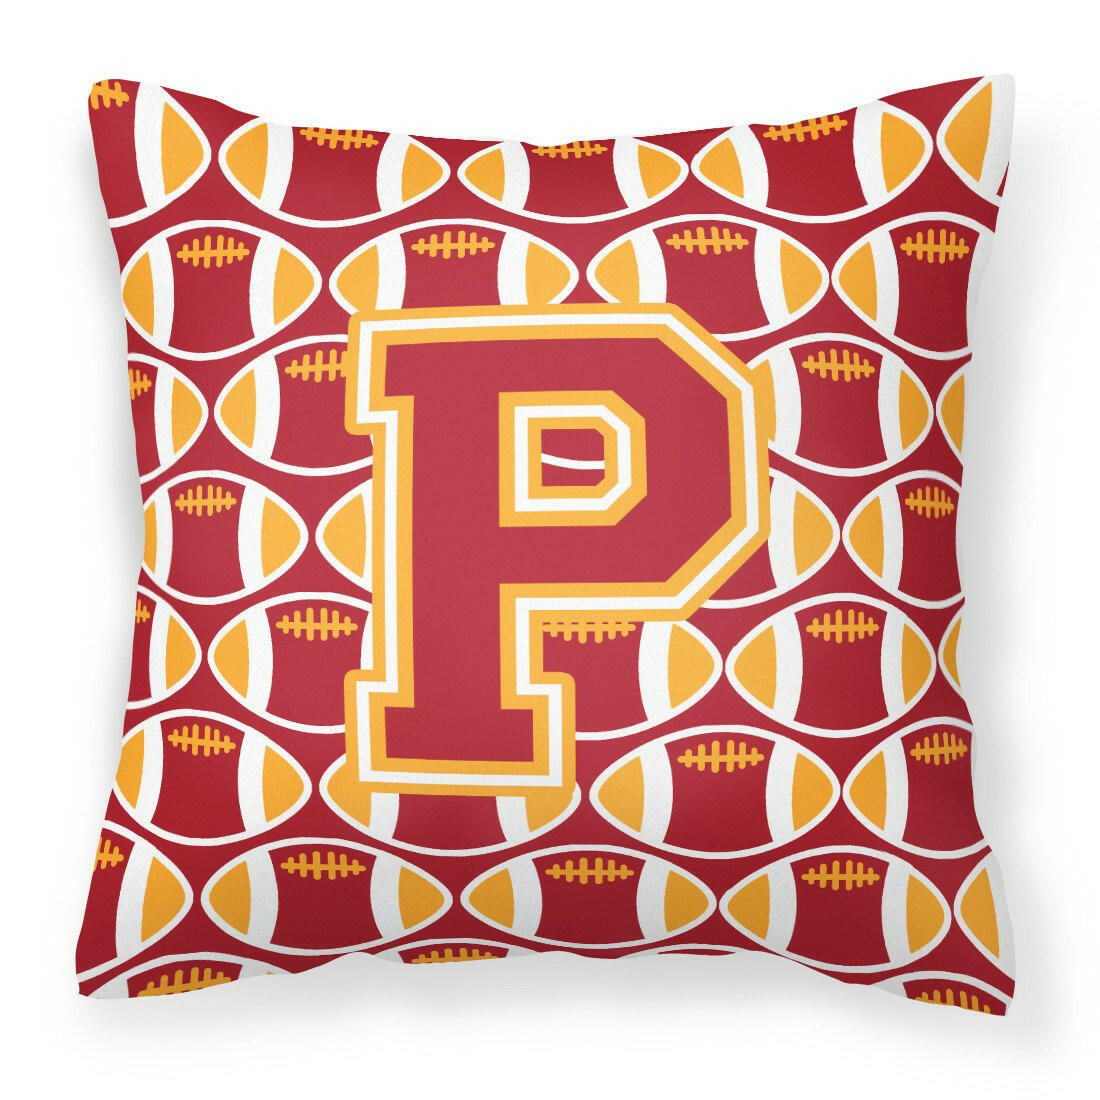 Letter P Football Cardinal and Gold Fabric Decorative Pillow CJ1070-PPW1414 by Caroline's Treasures